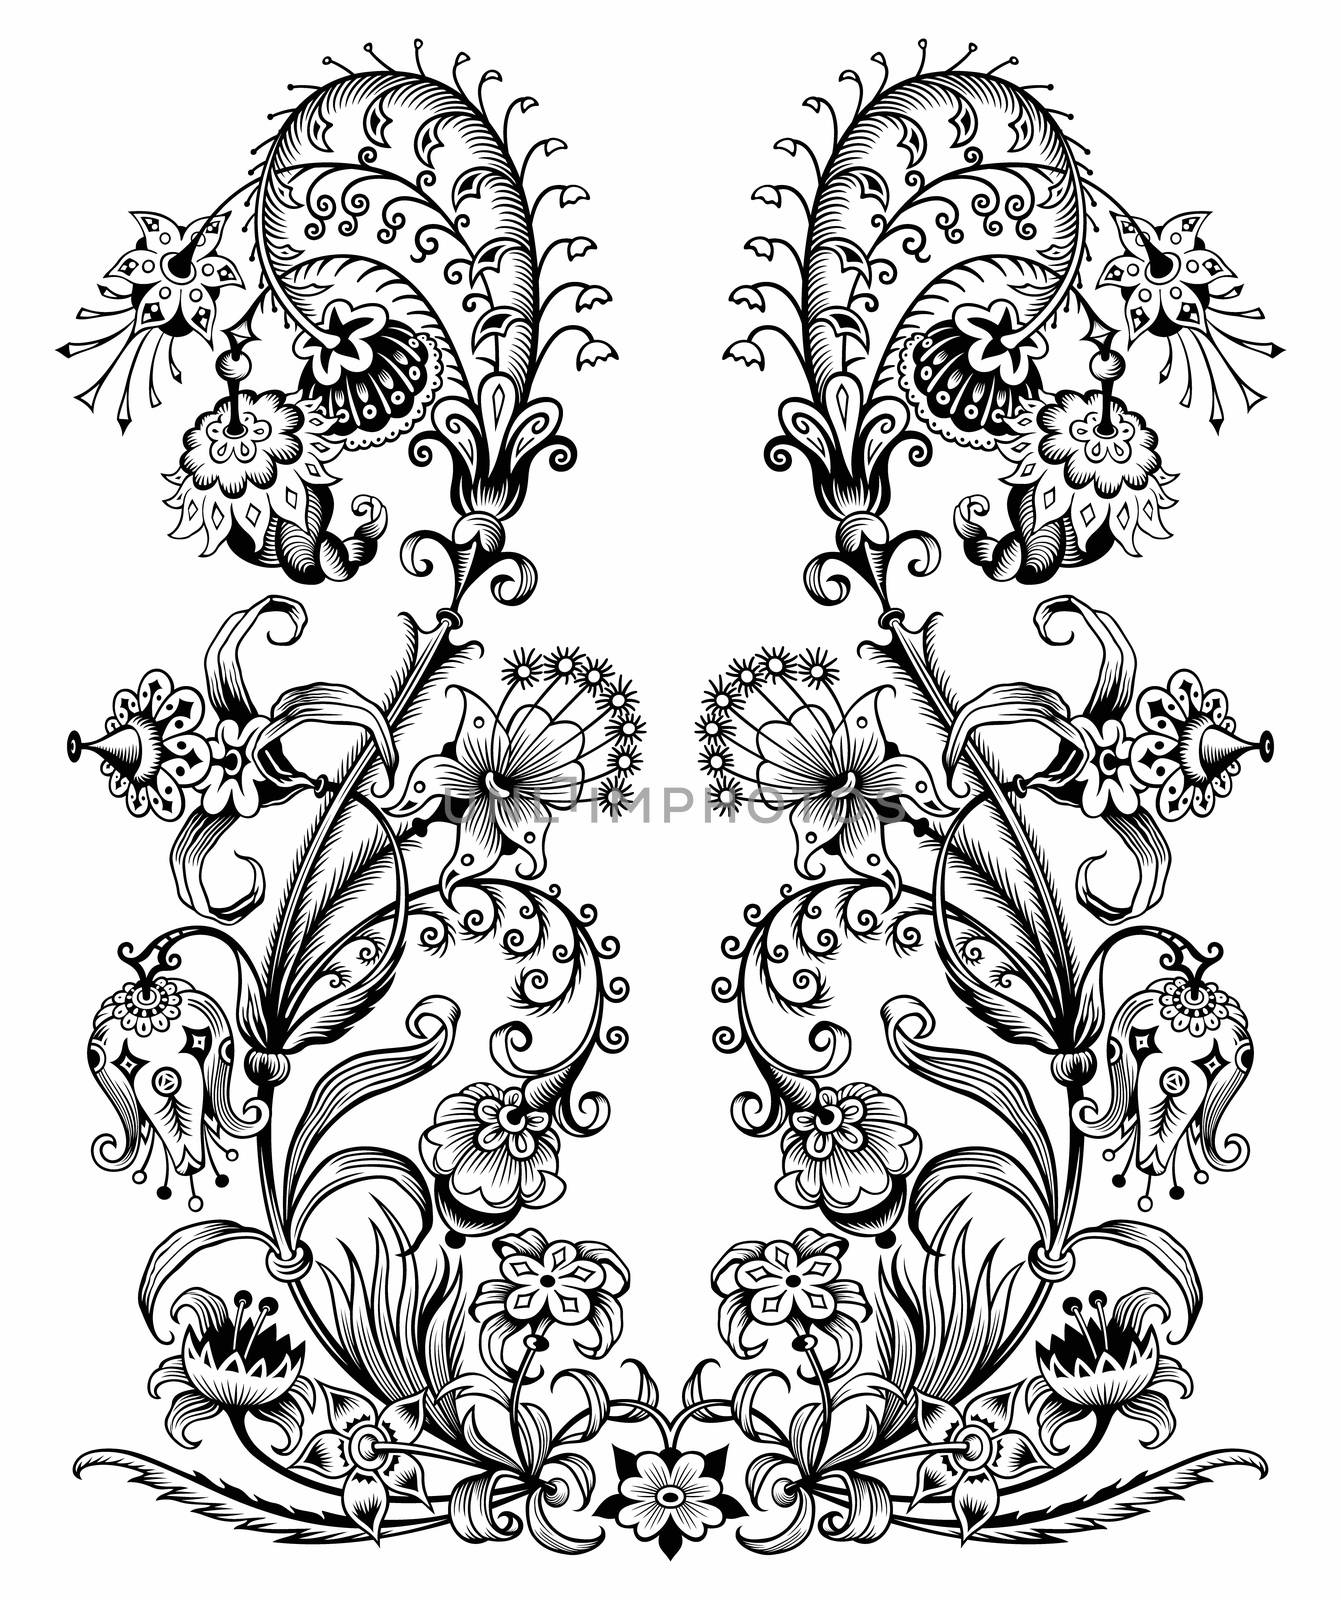 Floral hand drawn vector vintage illustration. Engraved nature elements and objects